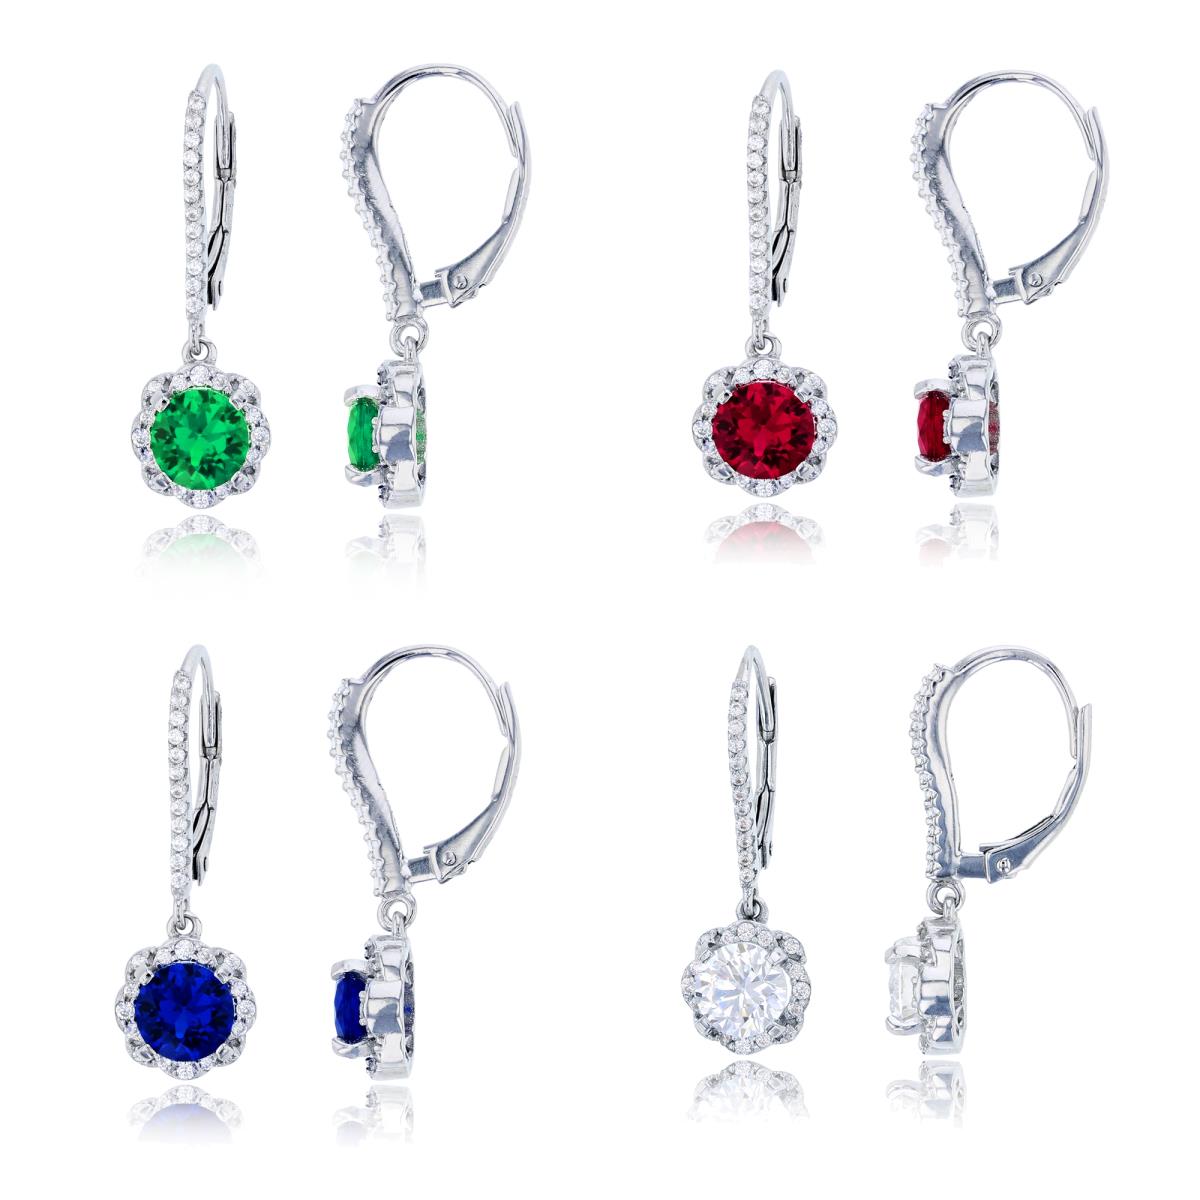 Sterling Silver Rhodium 6mm White, Emerald, Ruby & Sapphire Rd Cut CZ Flower Leverback Earring Set Of 4